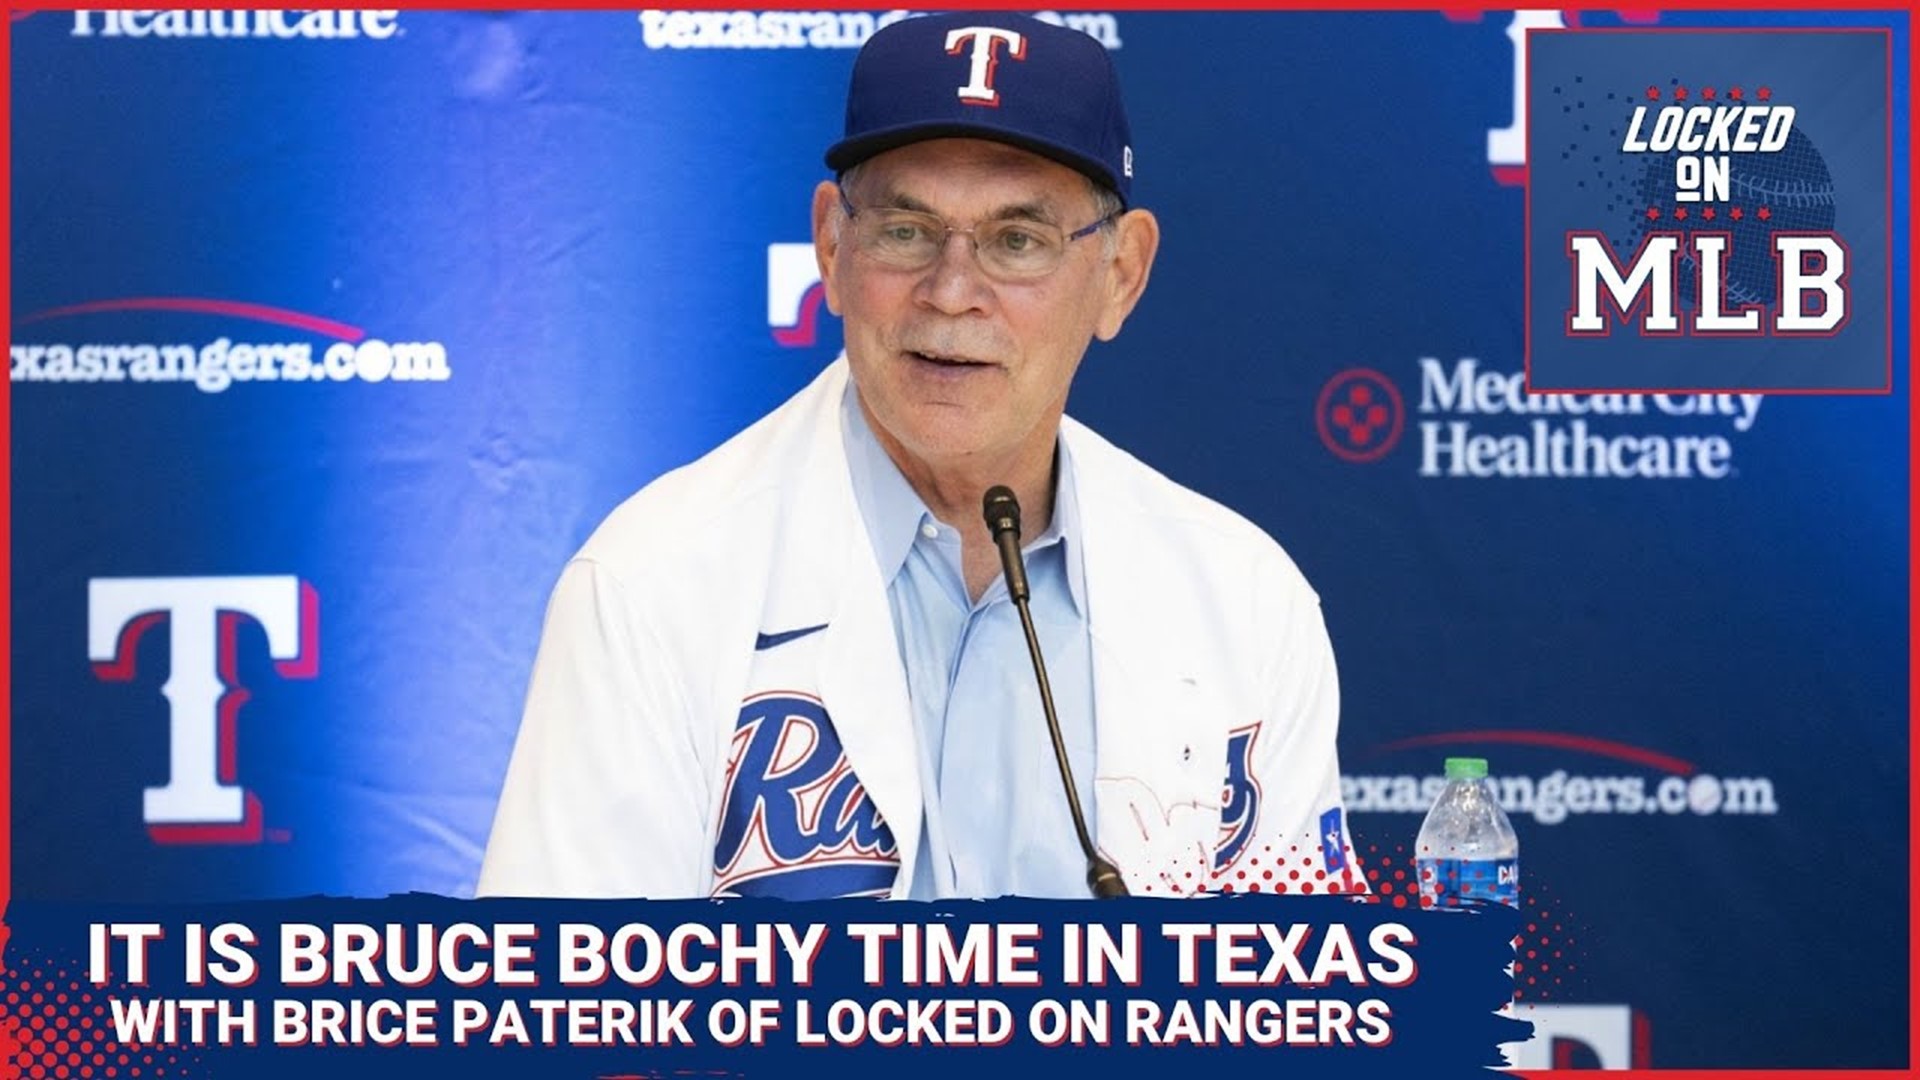 Locked on MLB - It is Bruce Bochy Time in Texas featuring Brice Paterik